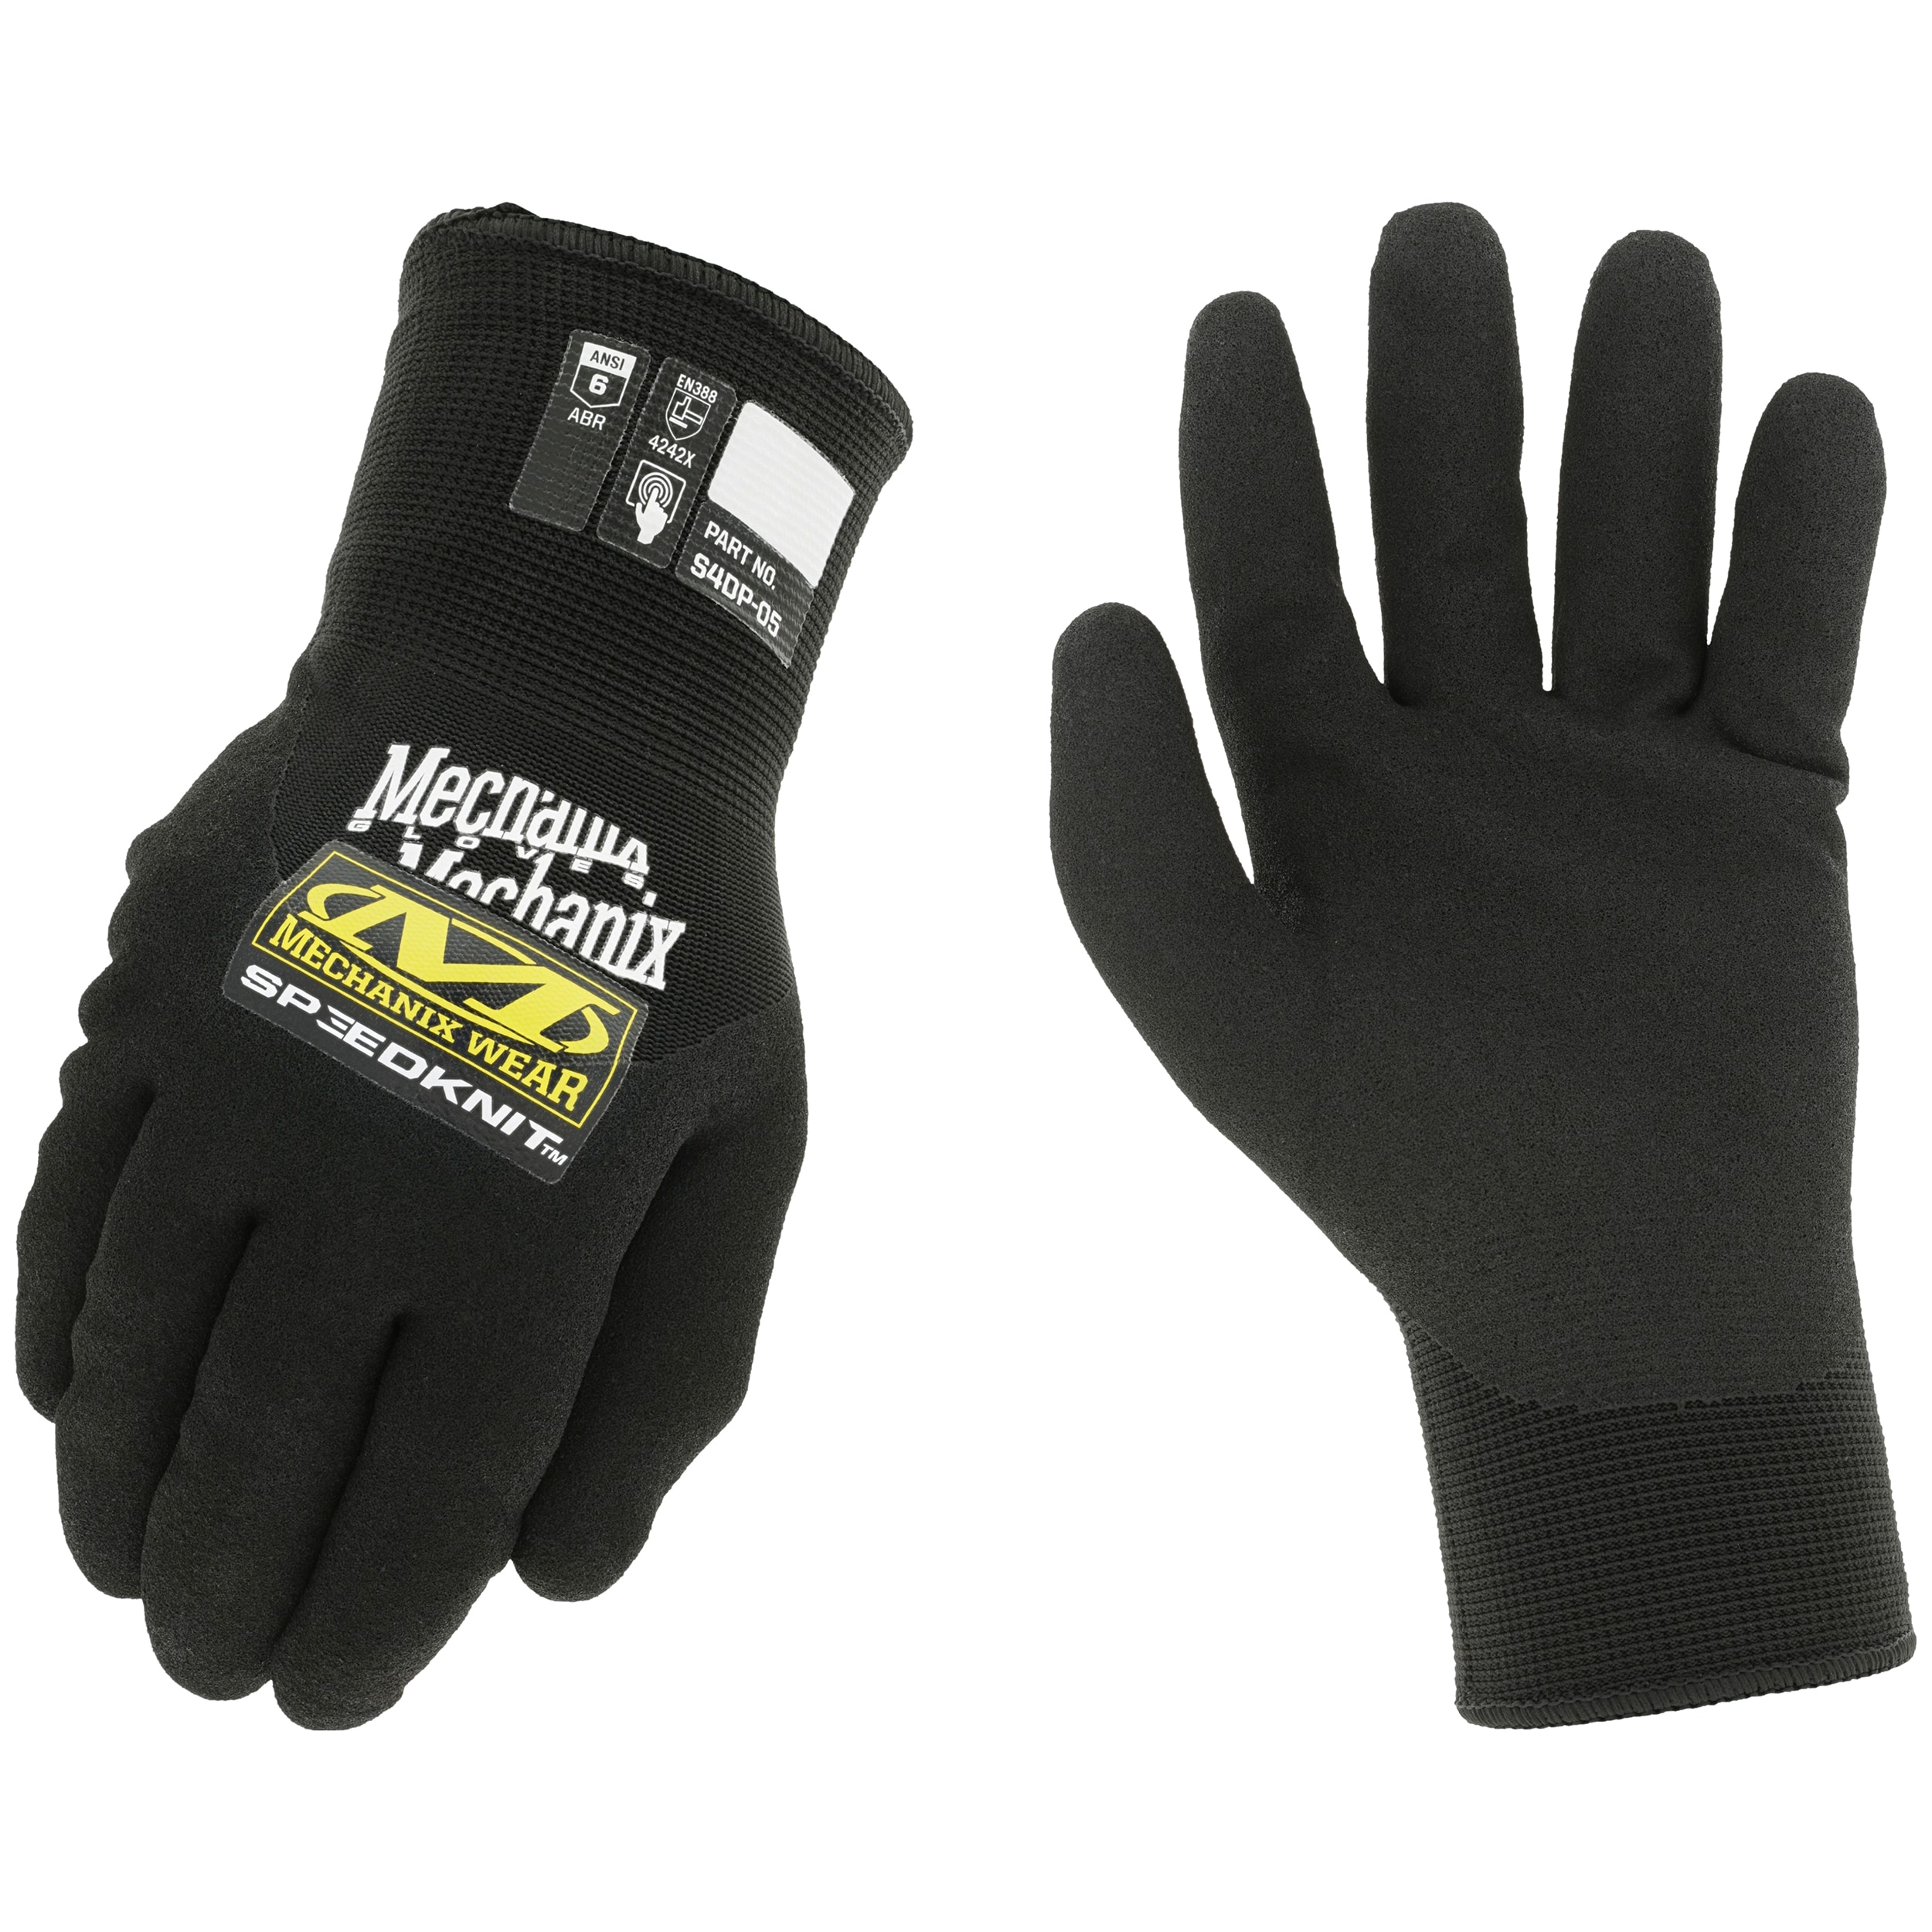 Touch Screen Compatible. Snap-on Large Orange Work Gloves